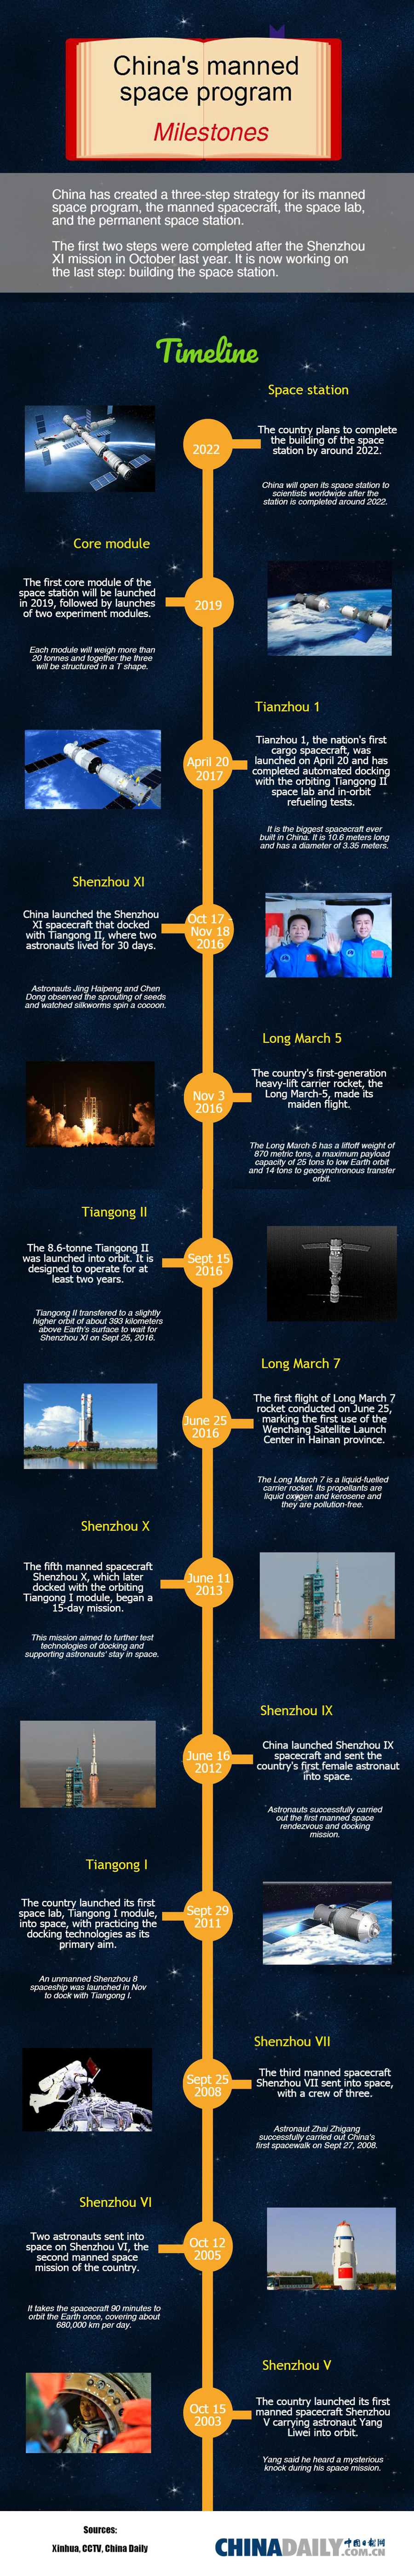 Milestones of the country's manned space program